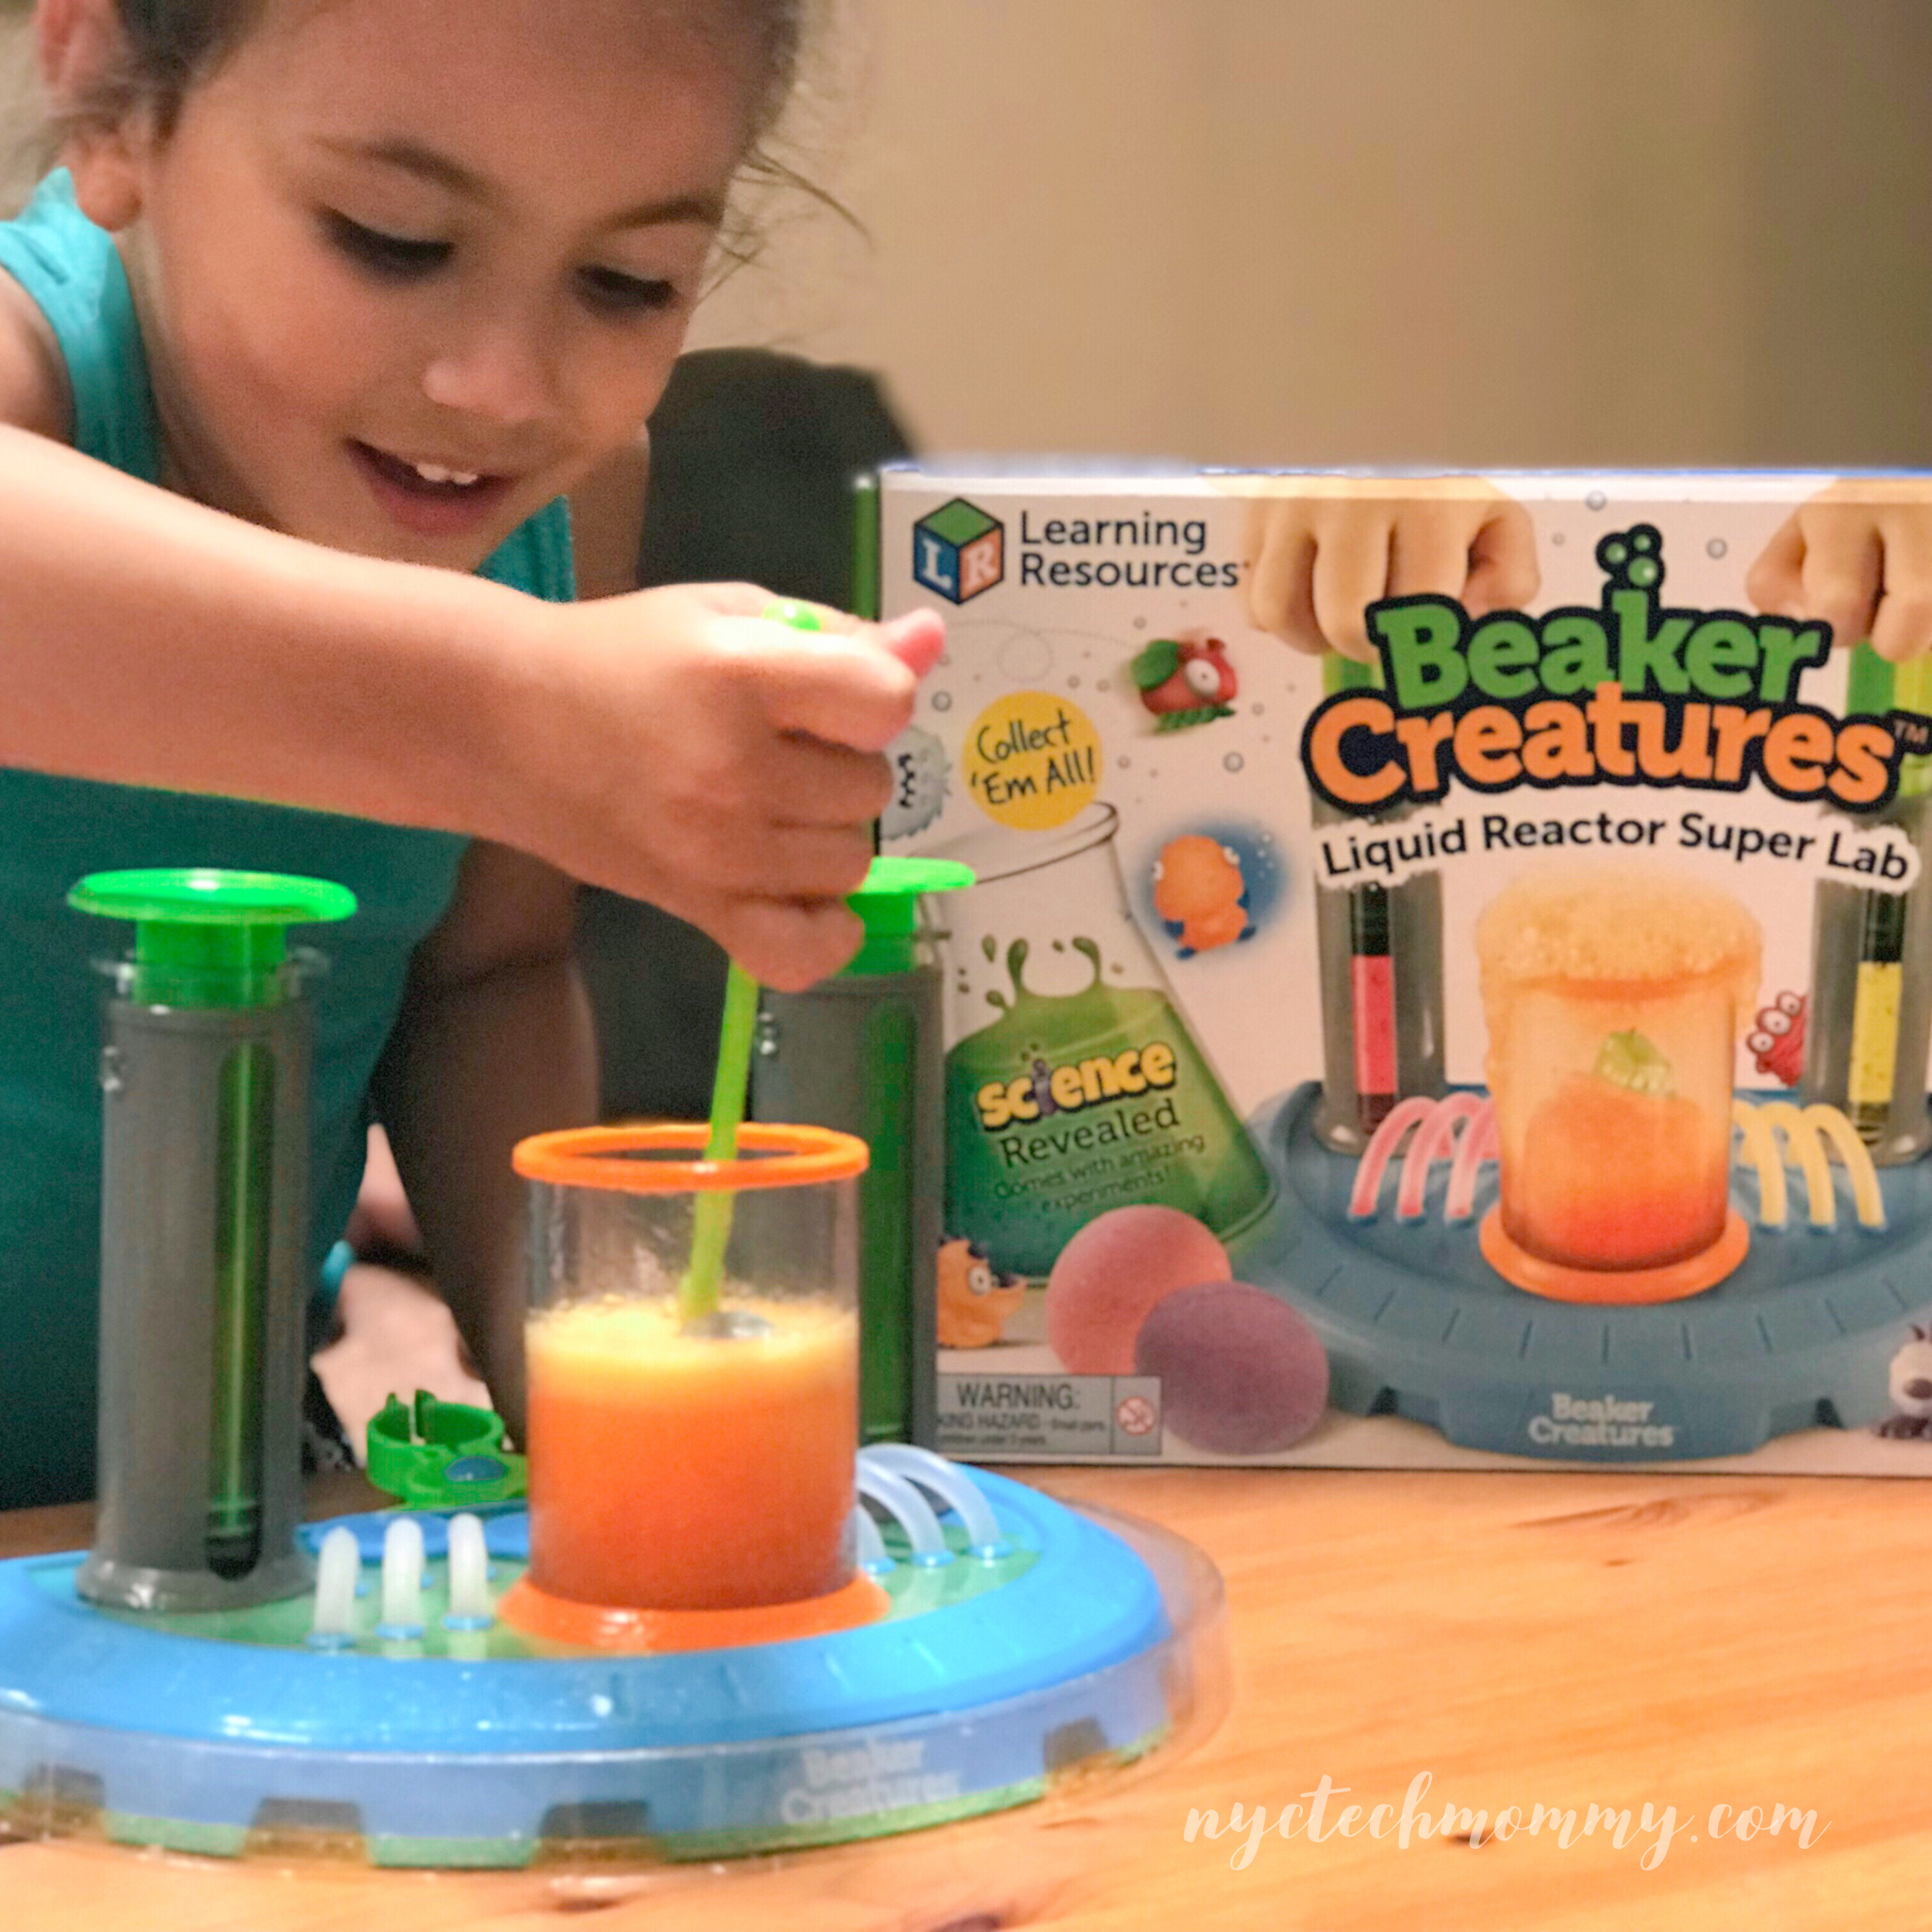 Beaker Creatures makes science fun! Check out these cool science experiments for little kids.